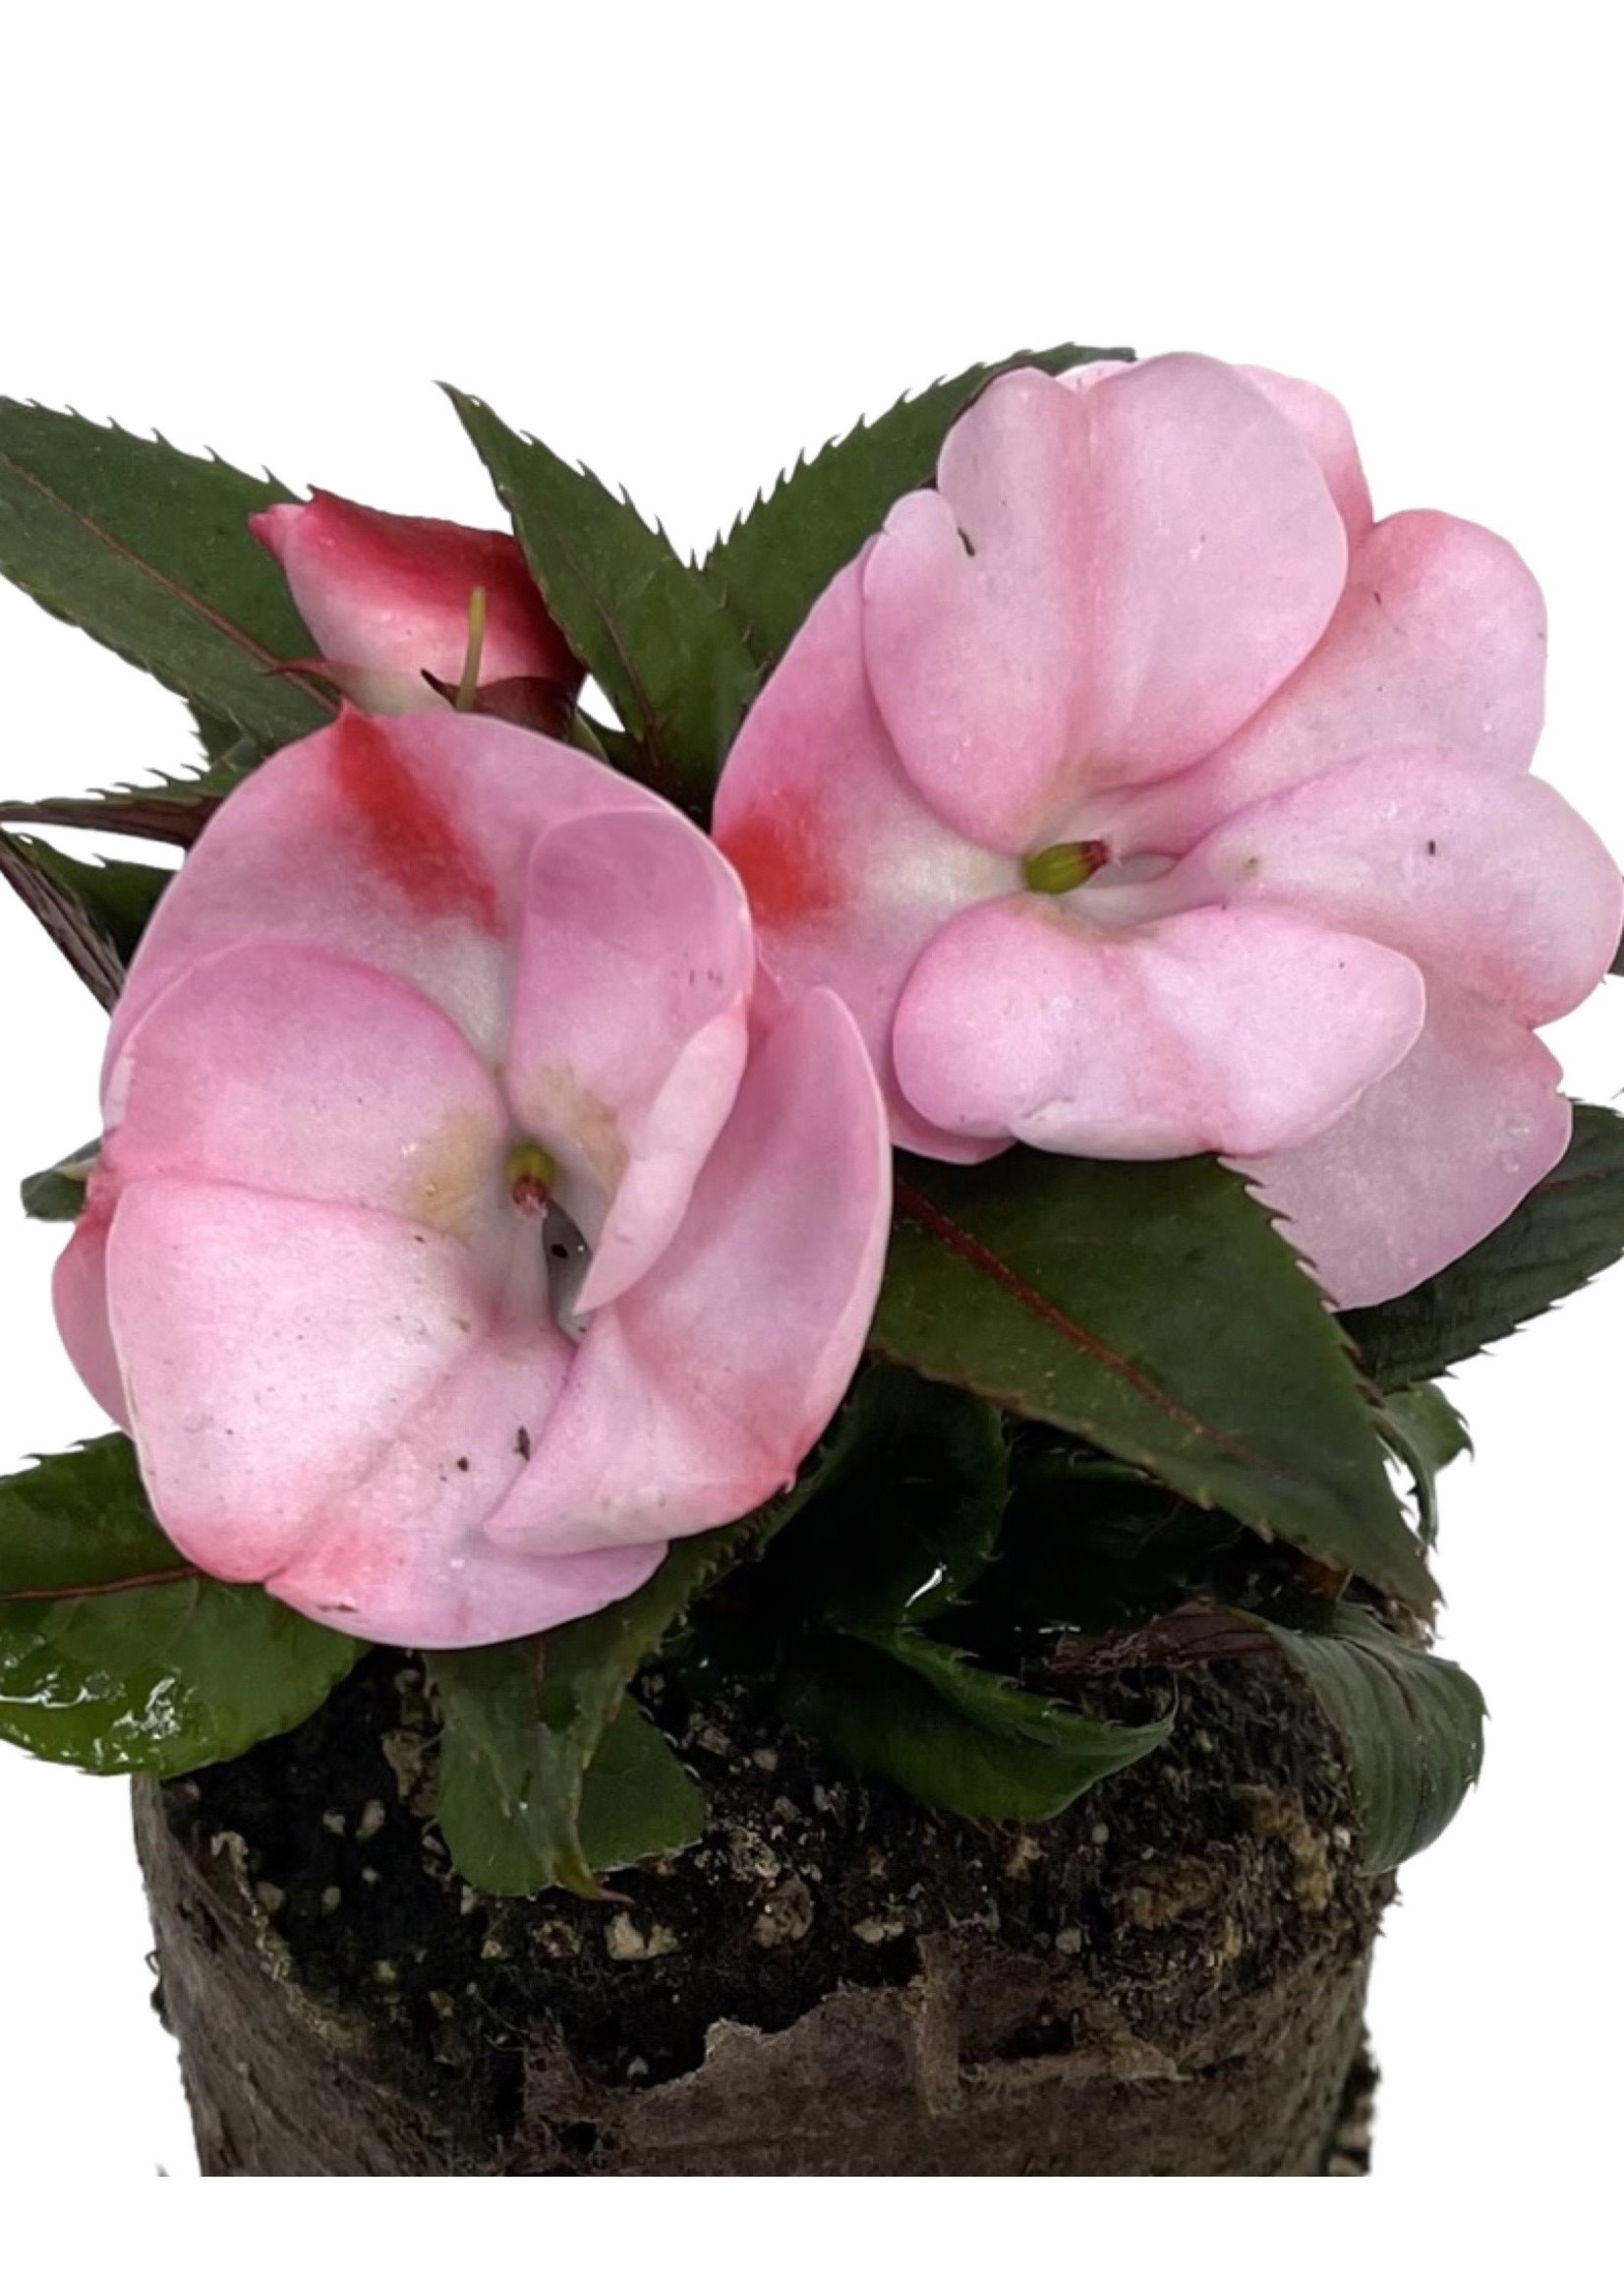 Sunpatiens ‘Compact Pink Candy’ 4 Inch